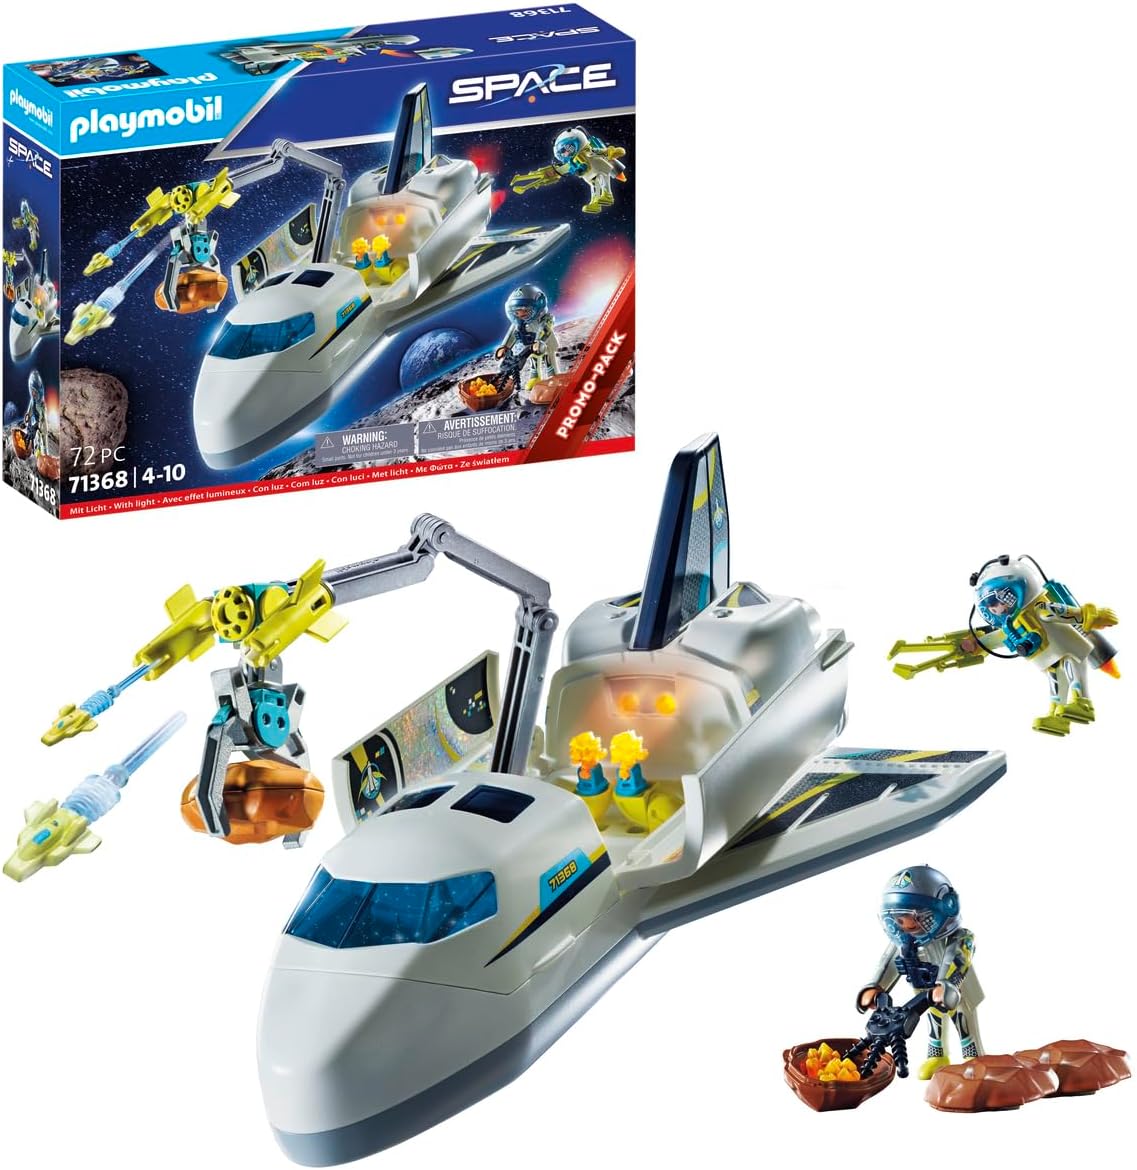 Mission Space Drone - 71370